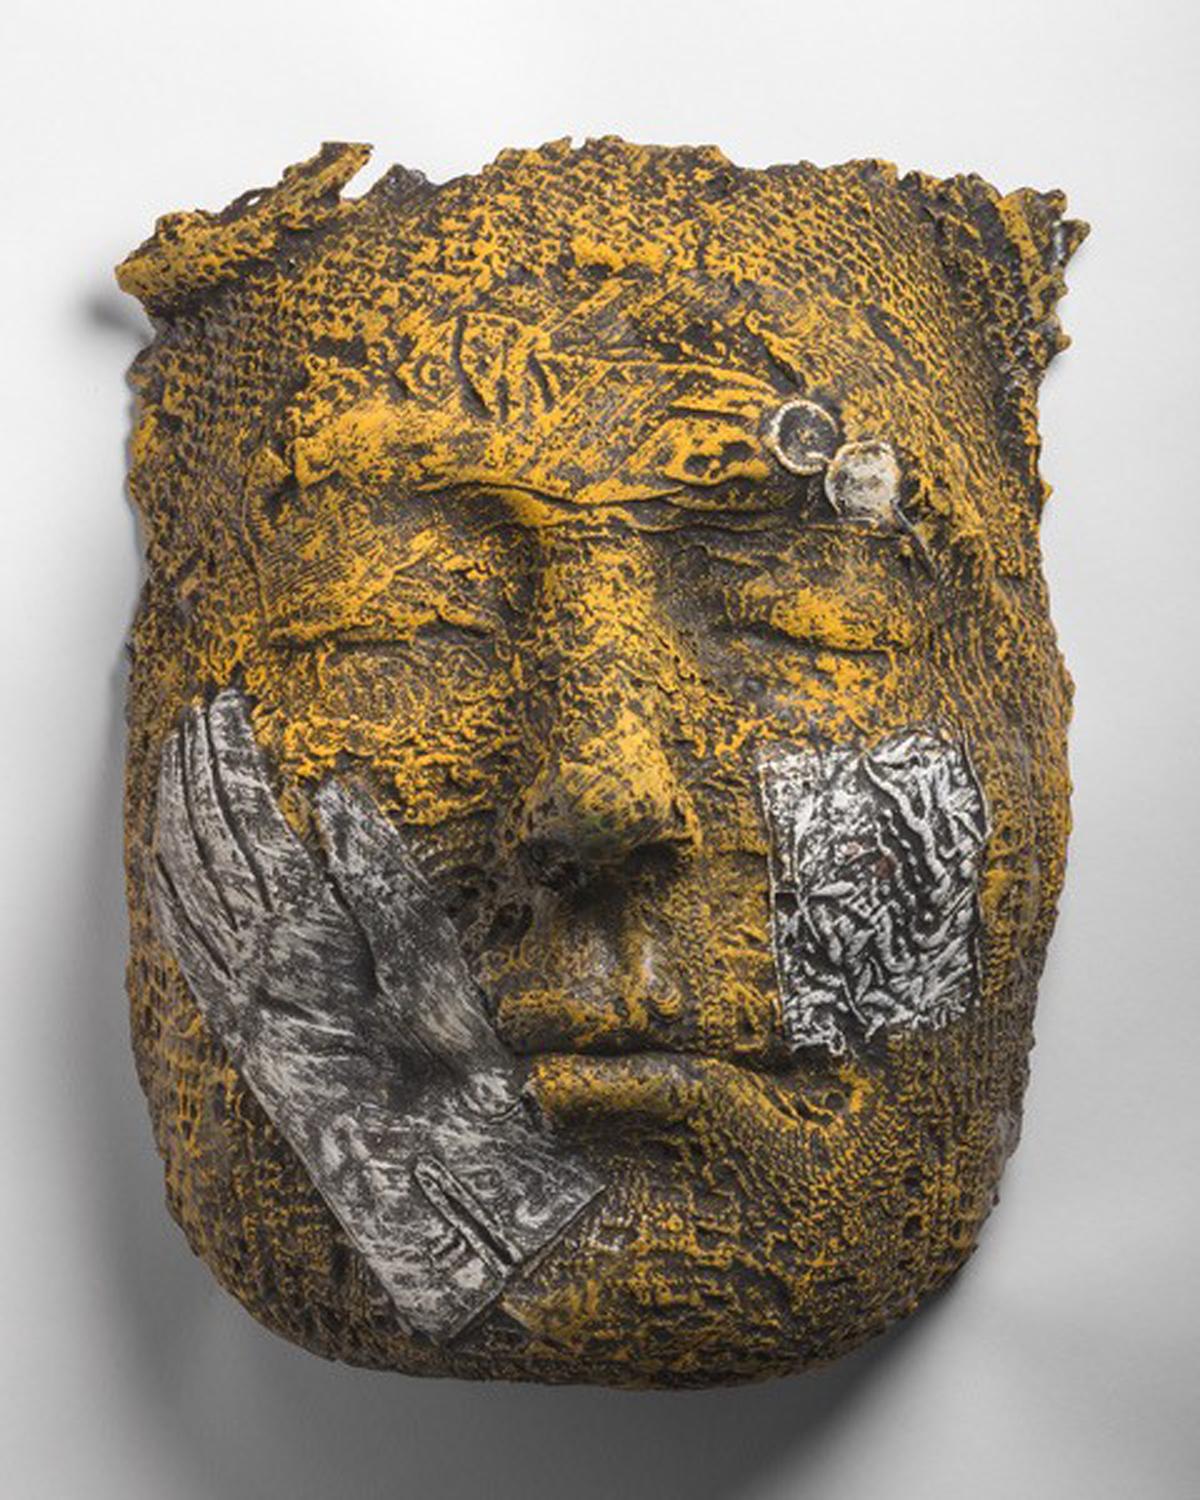 Annika with Glove by Michael Warrick
21x14x10" aluminum, wall mounted sculpture
Fragment of a portrait with impressions of their interests highlighted across the face.

Shipping price includes the custom packing necessary for safe transport of fine